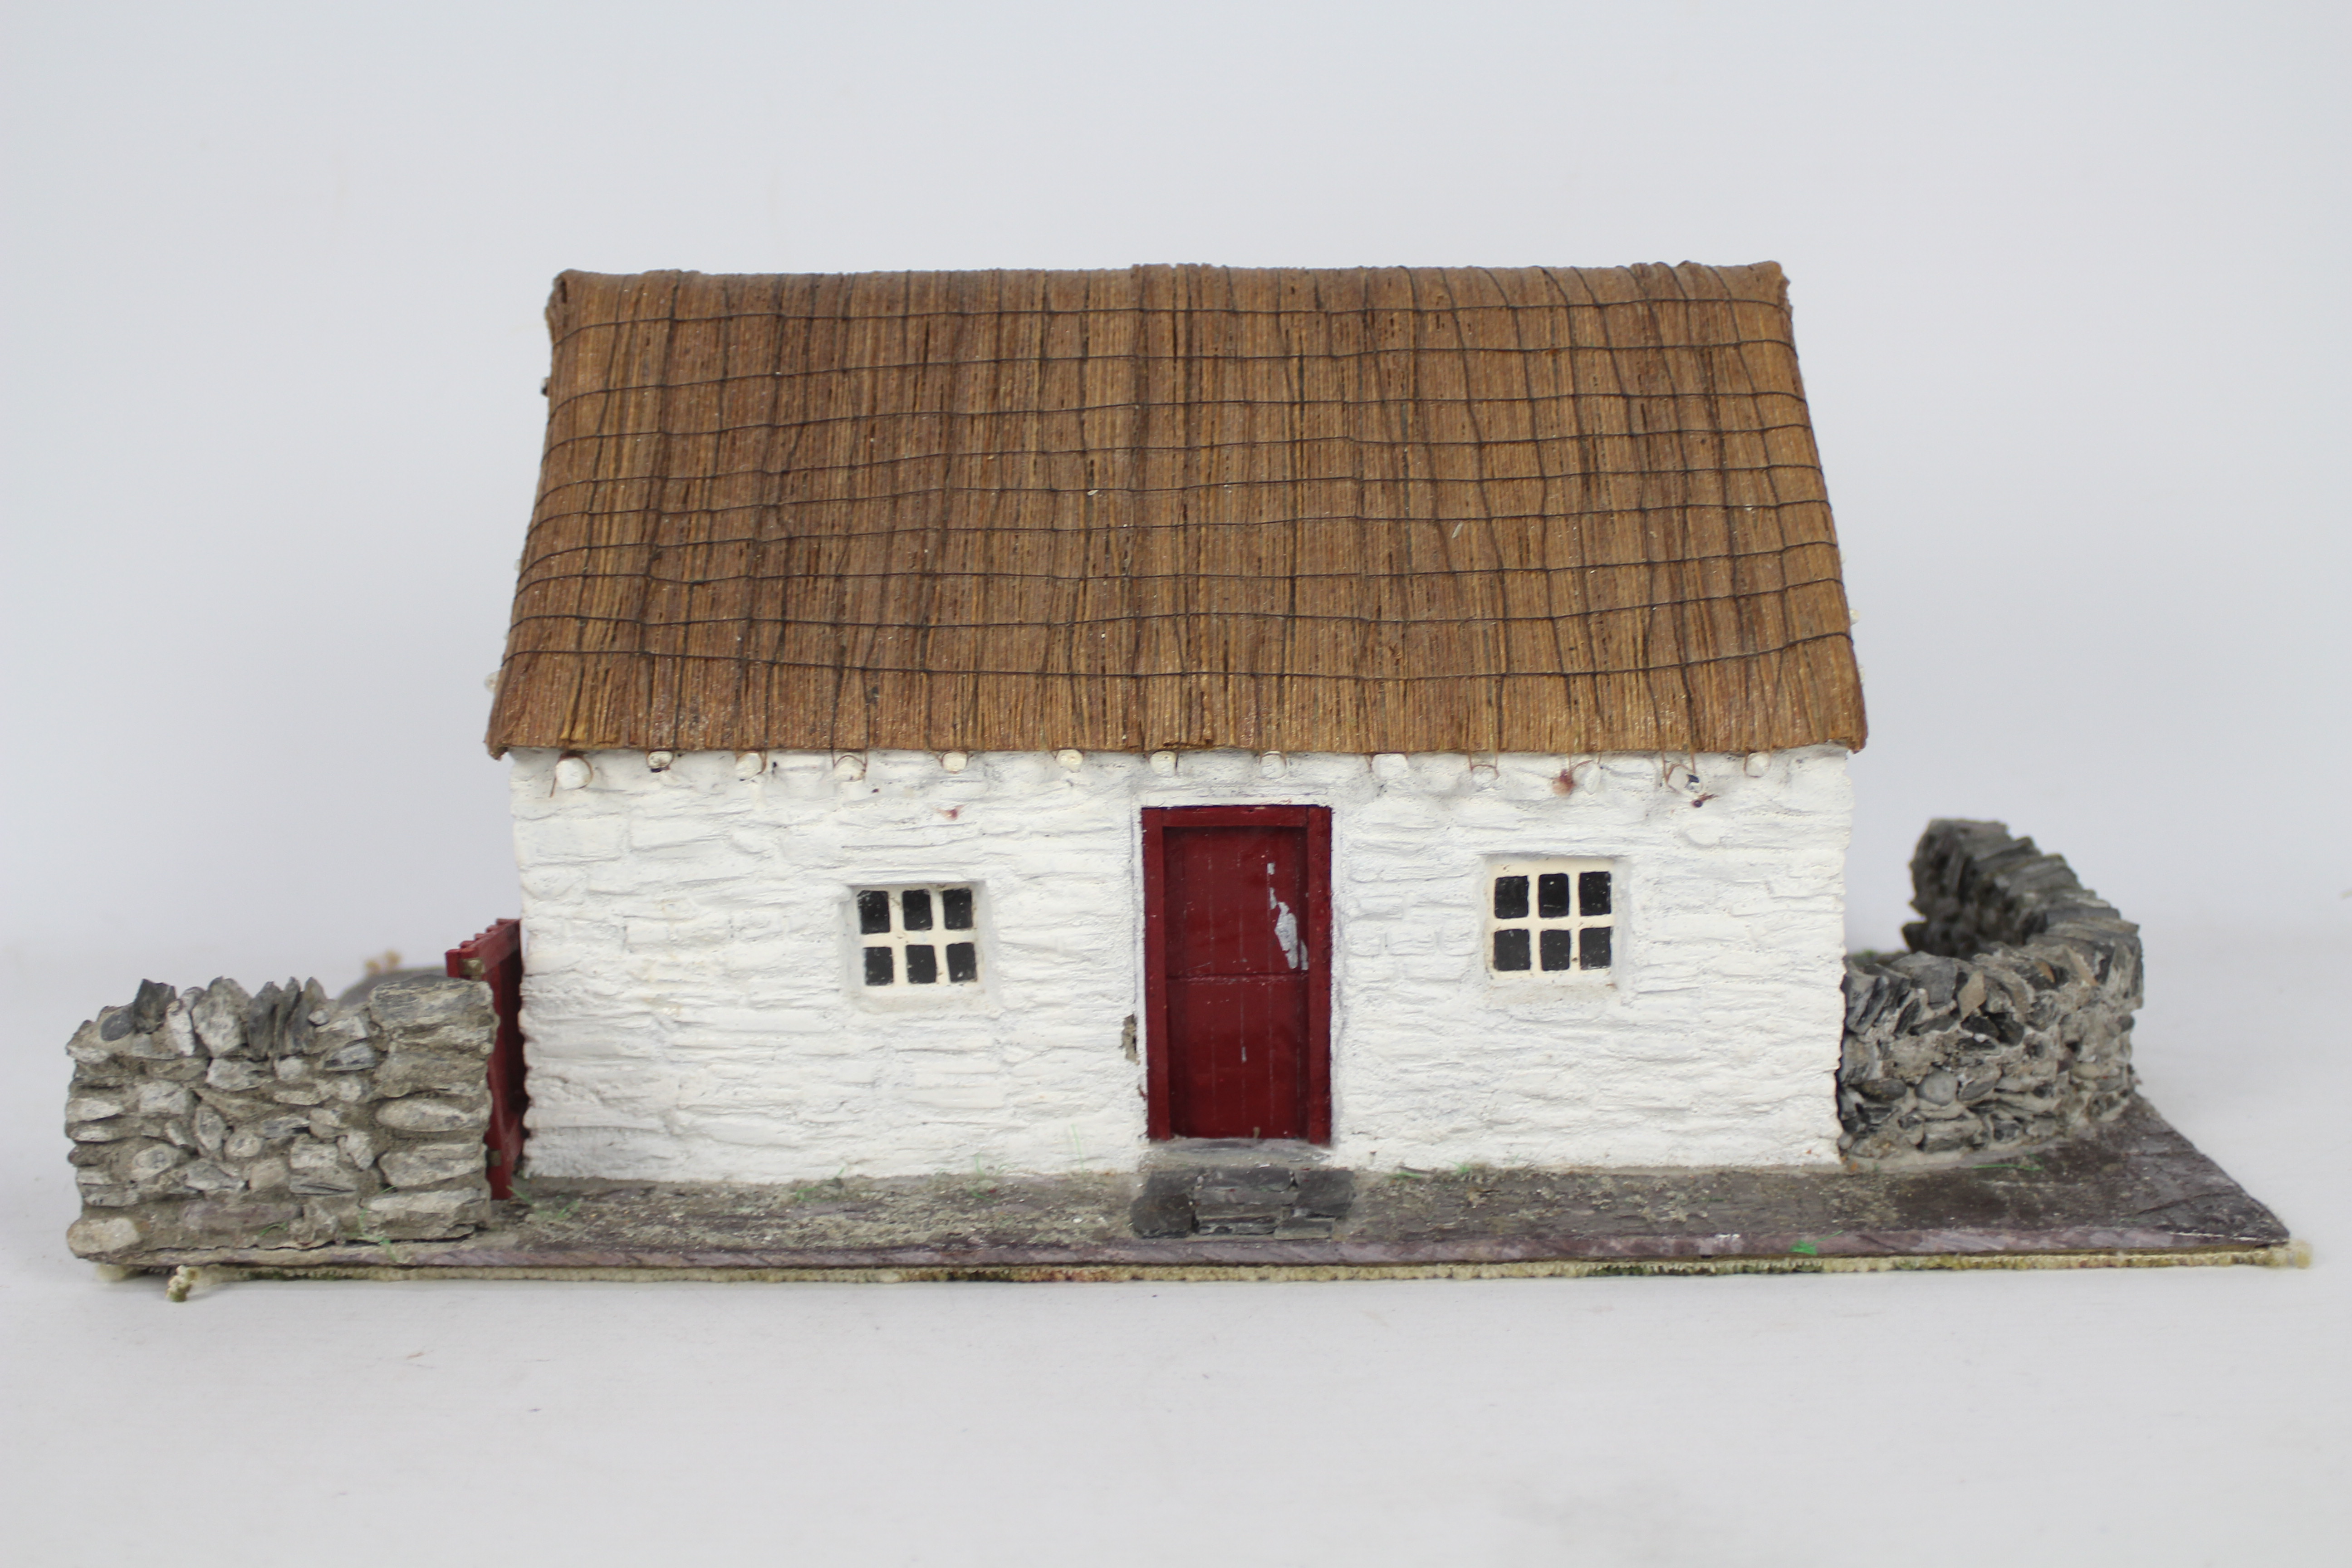 Unconfirmed Maker - An interesting and well constructed model of a thatched stone cottage,